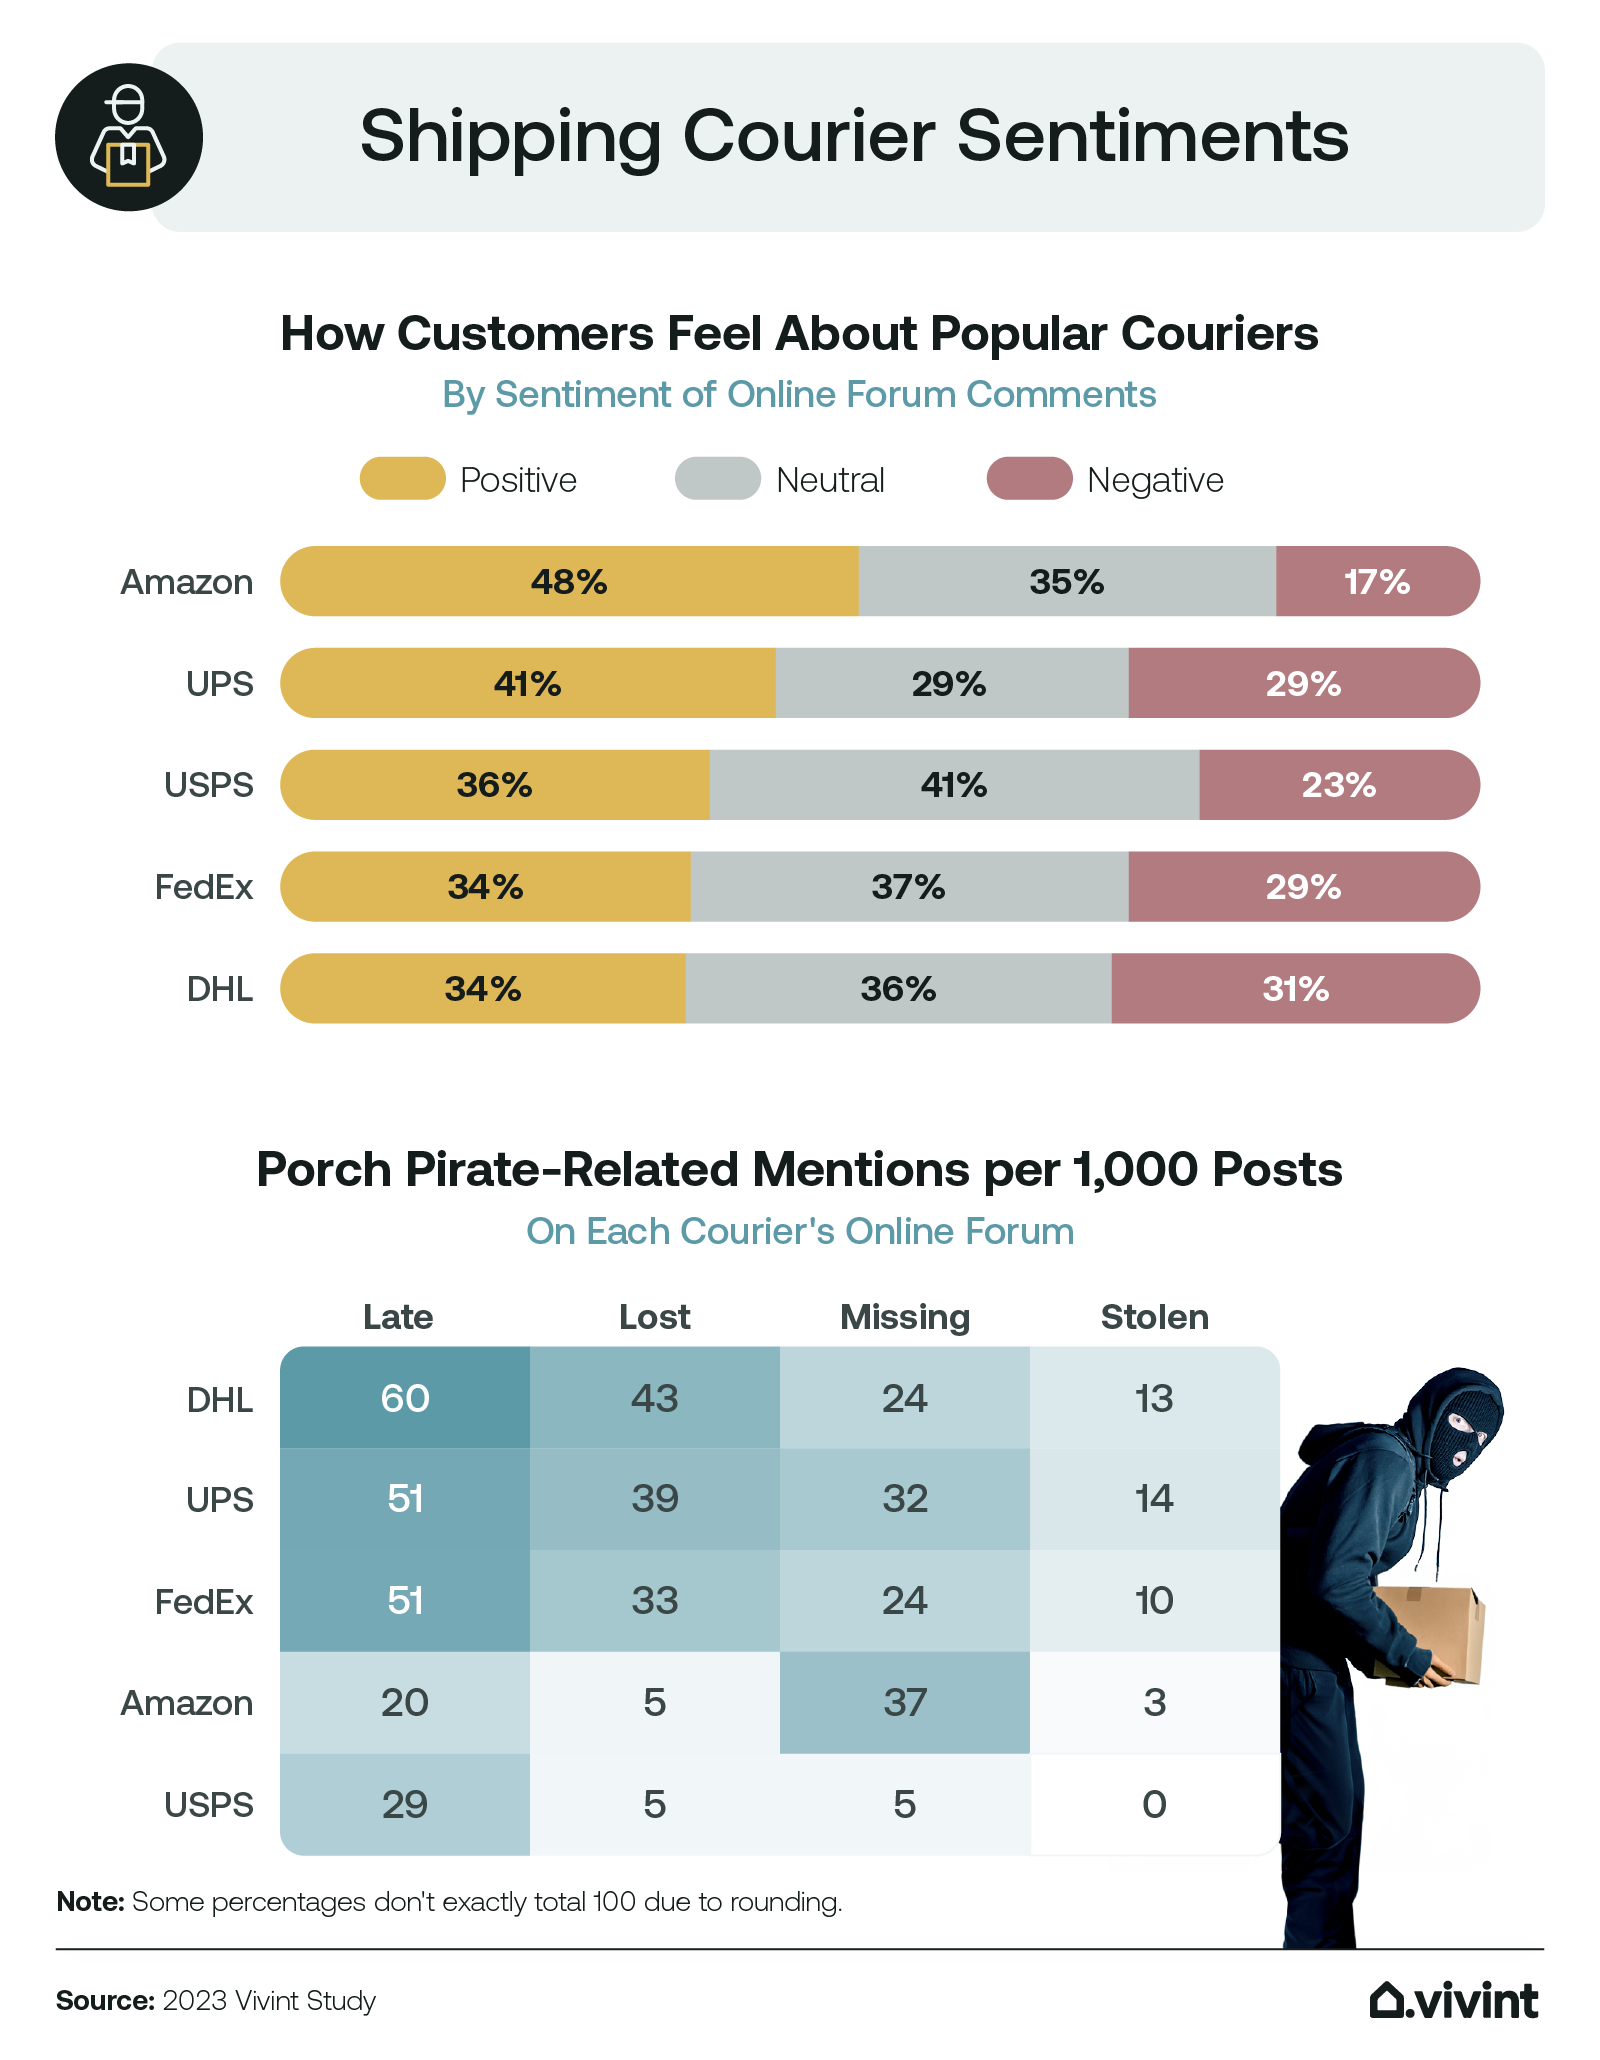 Information about how customers feel about popular couriers.